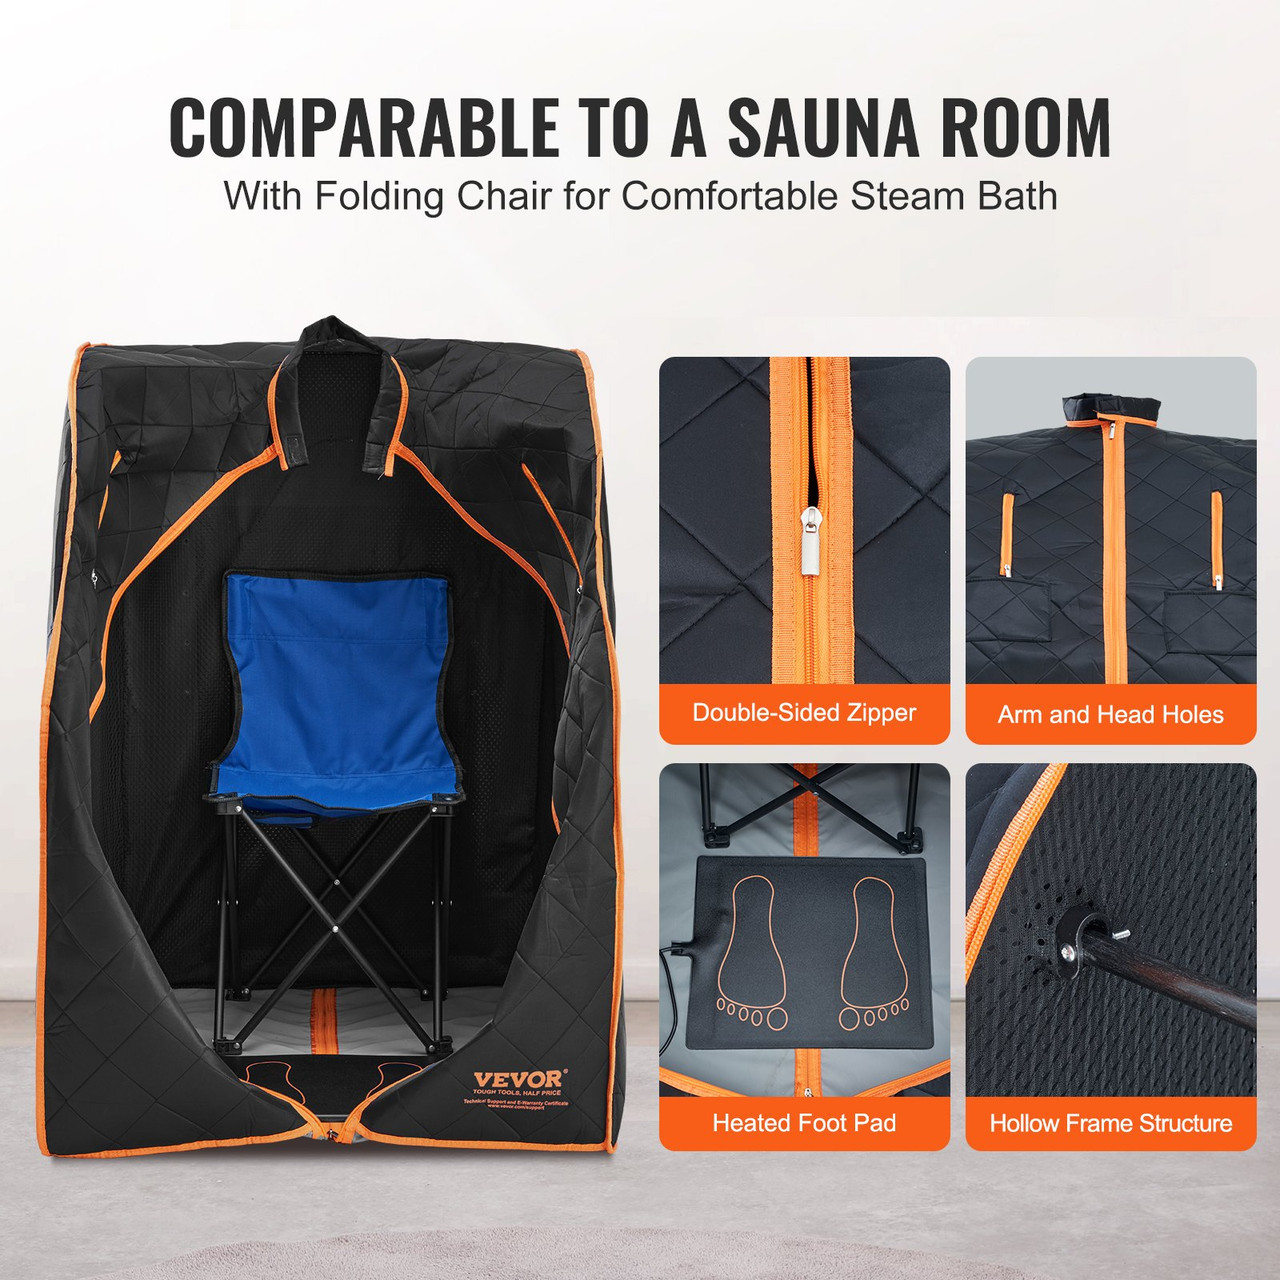 VEVOR Sauna Blanket for Detoxification, 1050W Portable Far Infrared Sauna Tent for Home, 104 - 167?, 1-60 Minutes Timer , Personal Sauna Box for Home Spa Indoor Black 27.56 x 31.5 x 38.58 inch